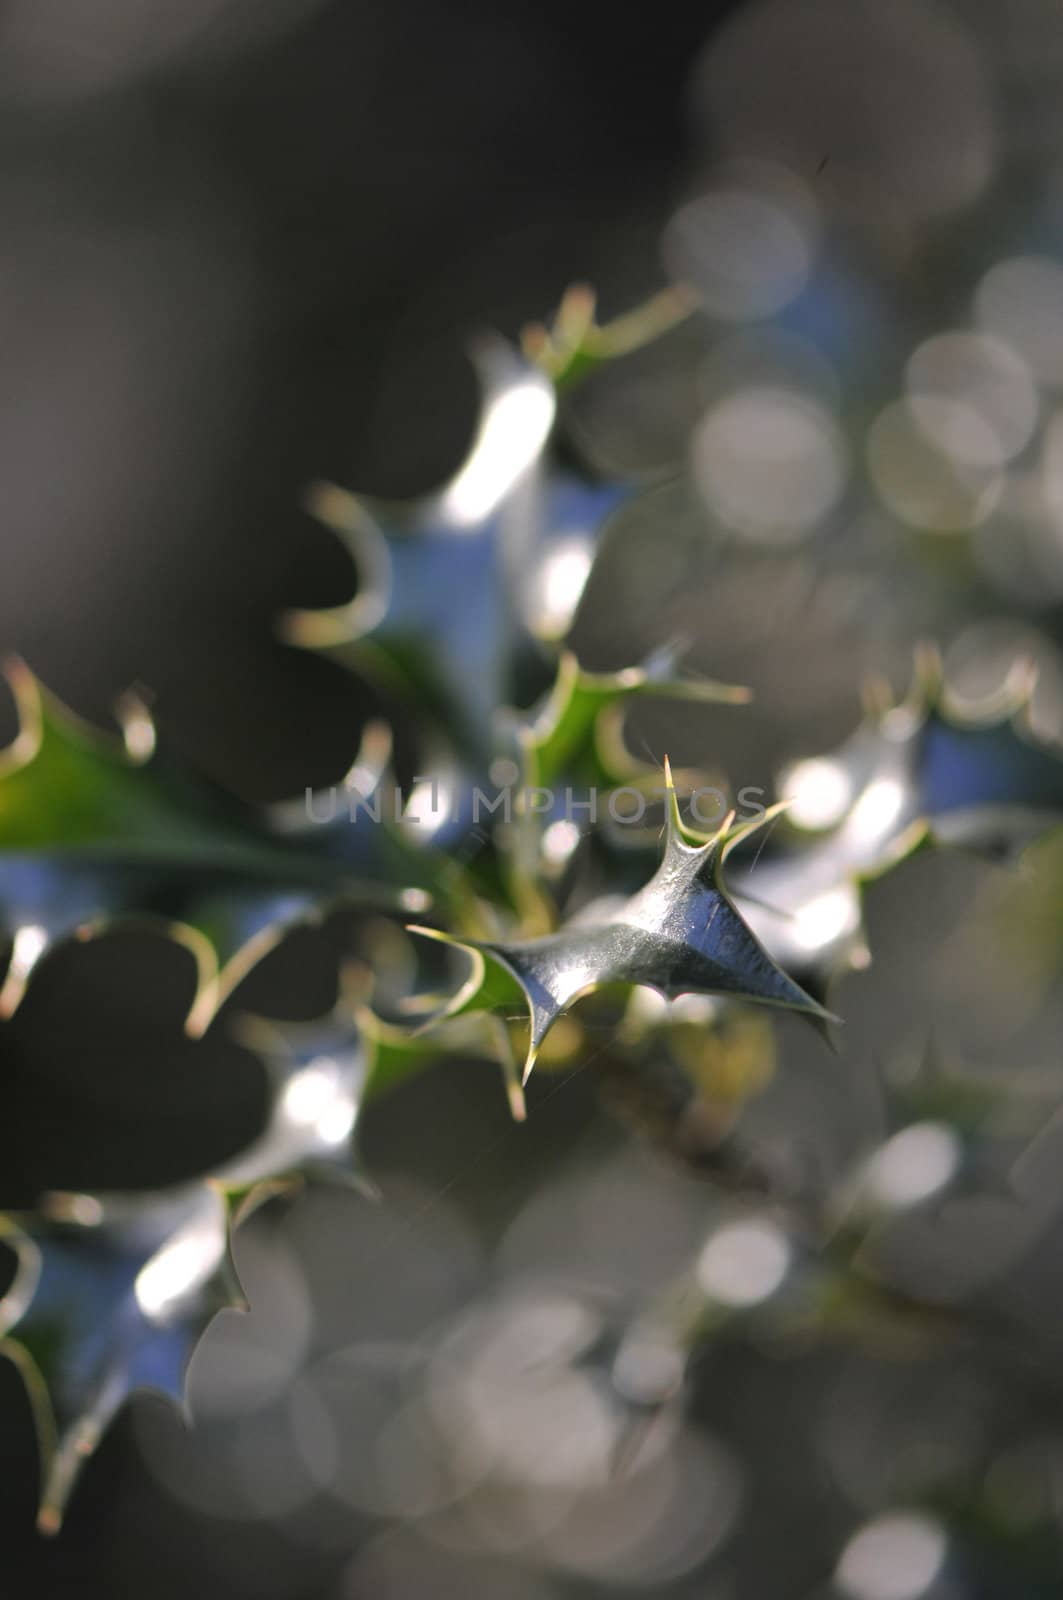 Dark green Holly Leafs with a blurred background by shkyo30